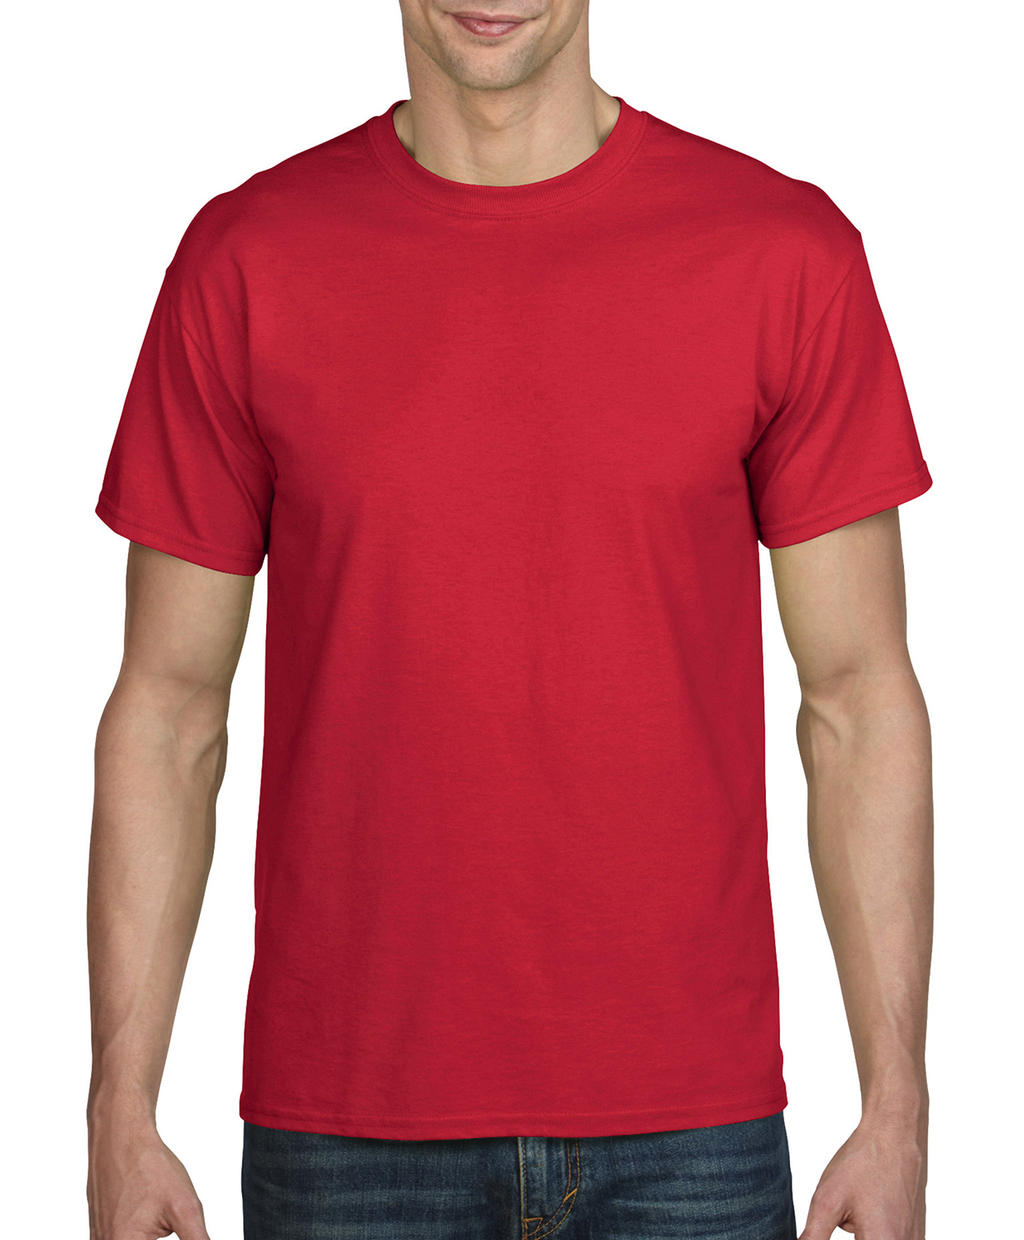  DryBlend? Adult T-Shirt in Farbe Red